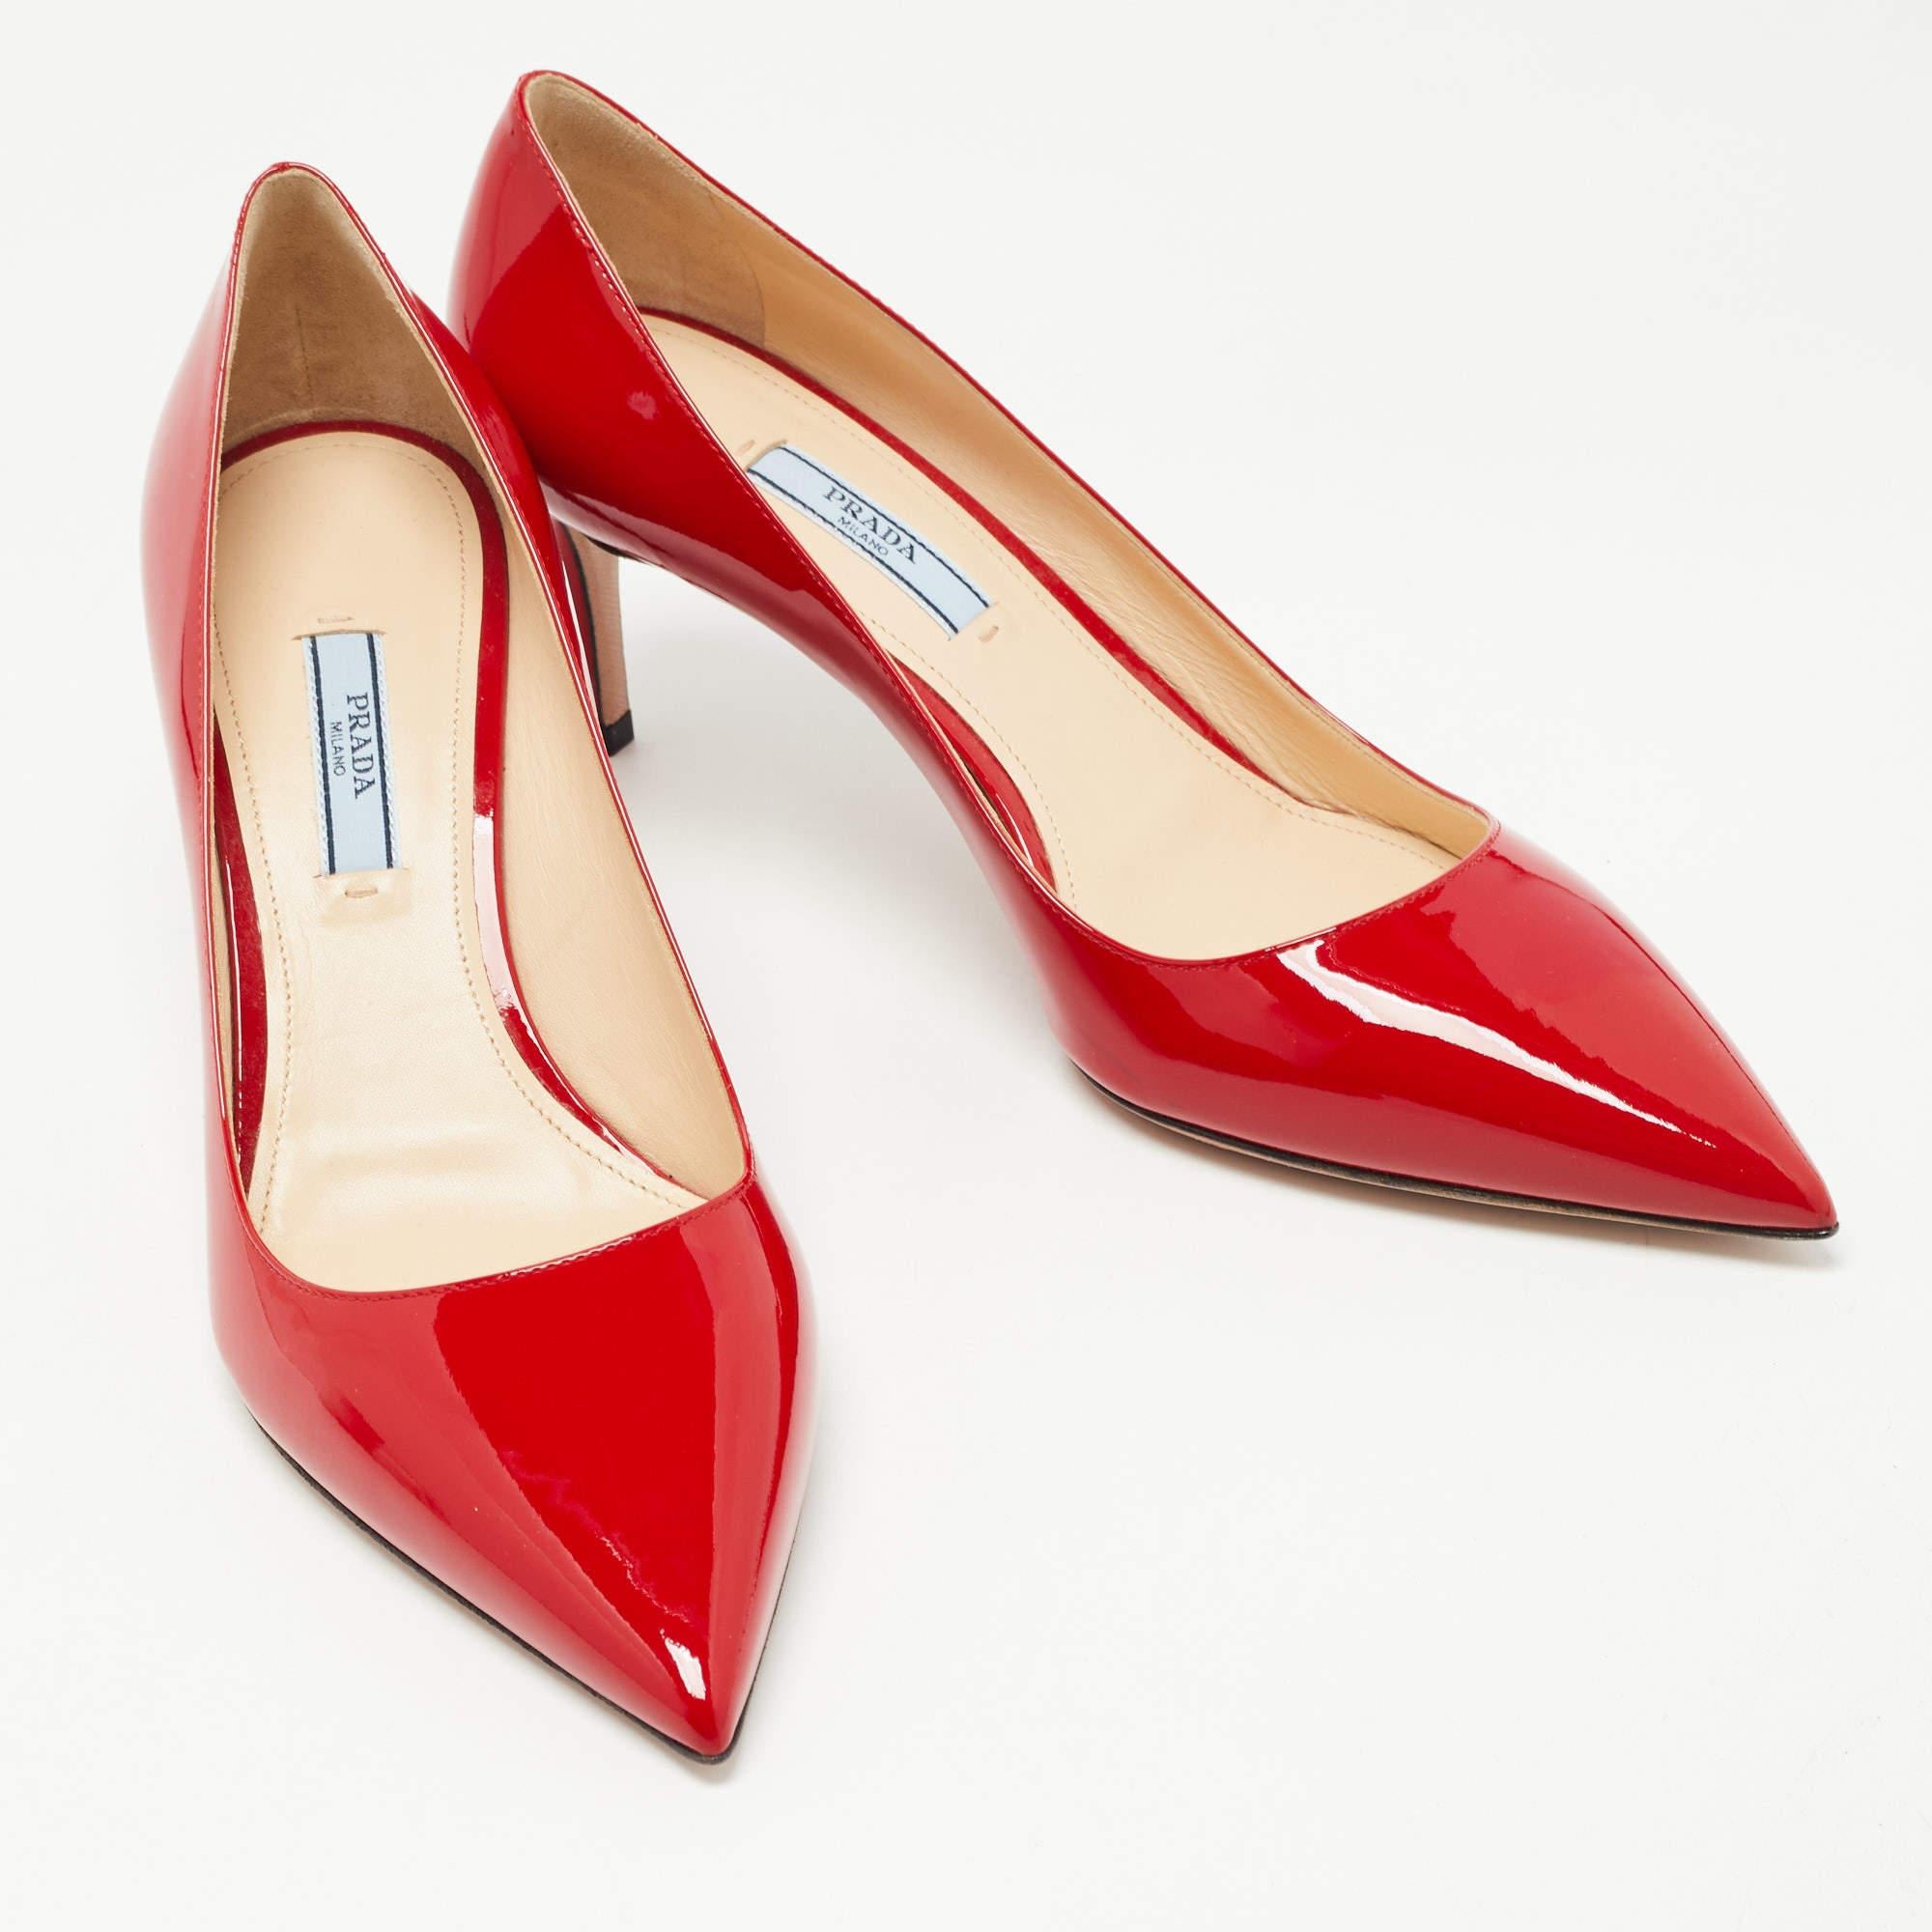 Prada Red Patent Leather Pointed Toe Pumps Size 40 1